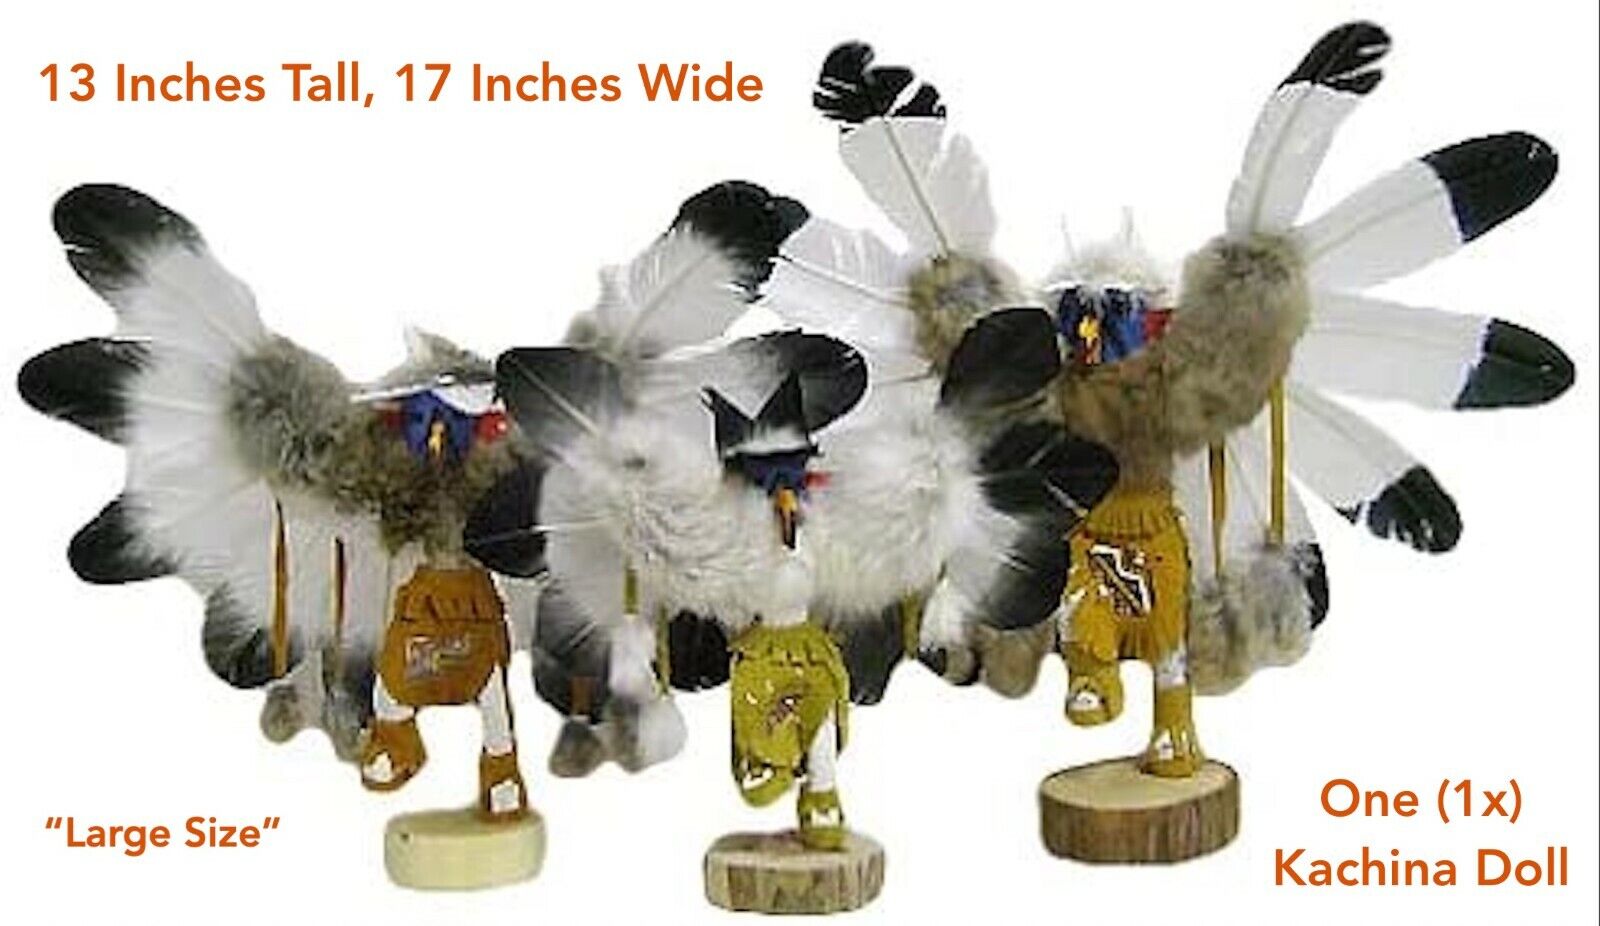 1x LARGE SIZE Navajo EAGLE Kachina Doll (NEW): 13 inches Tall, 17 Inches Wide